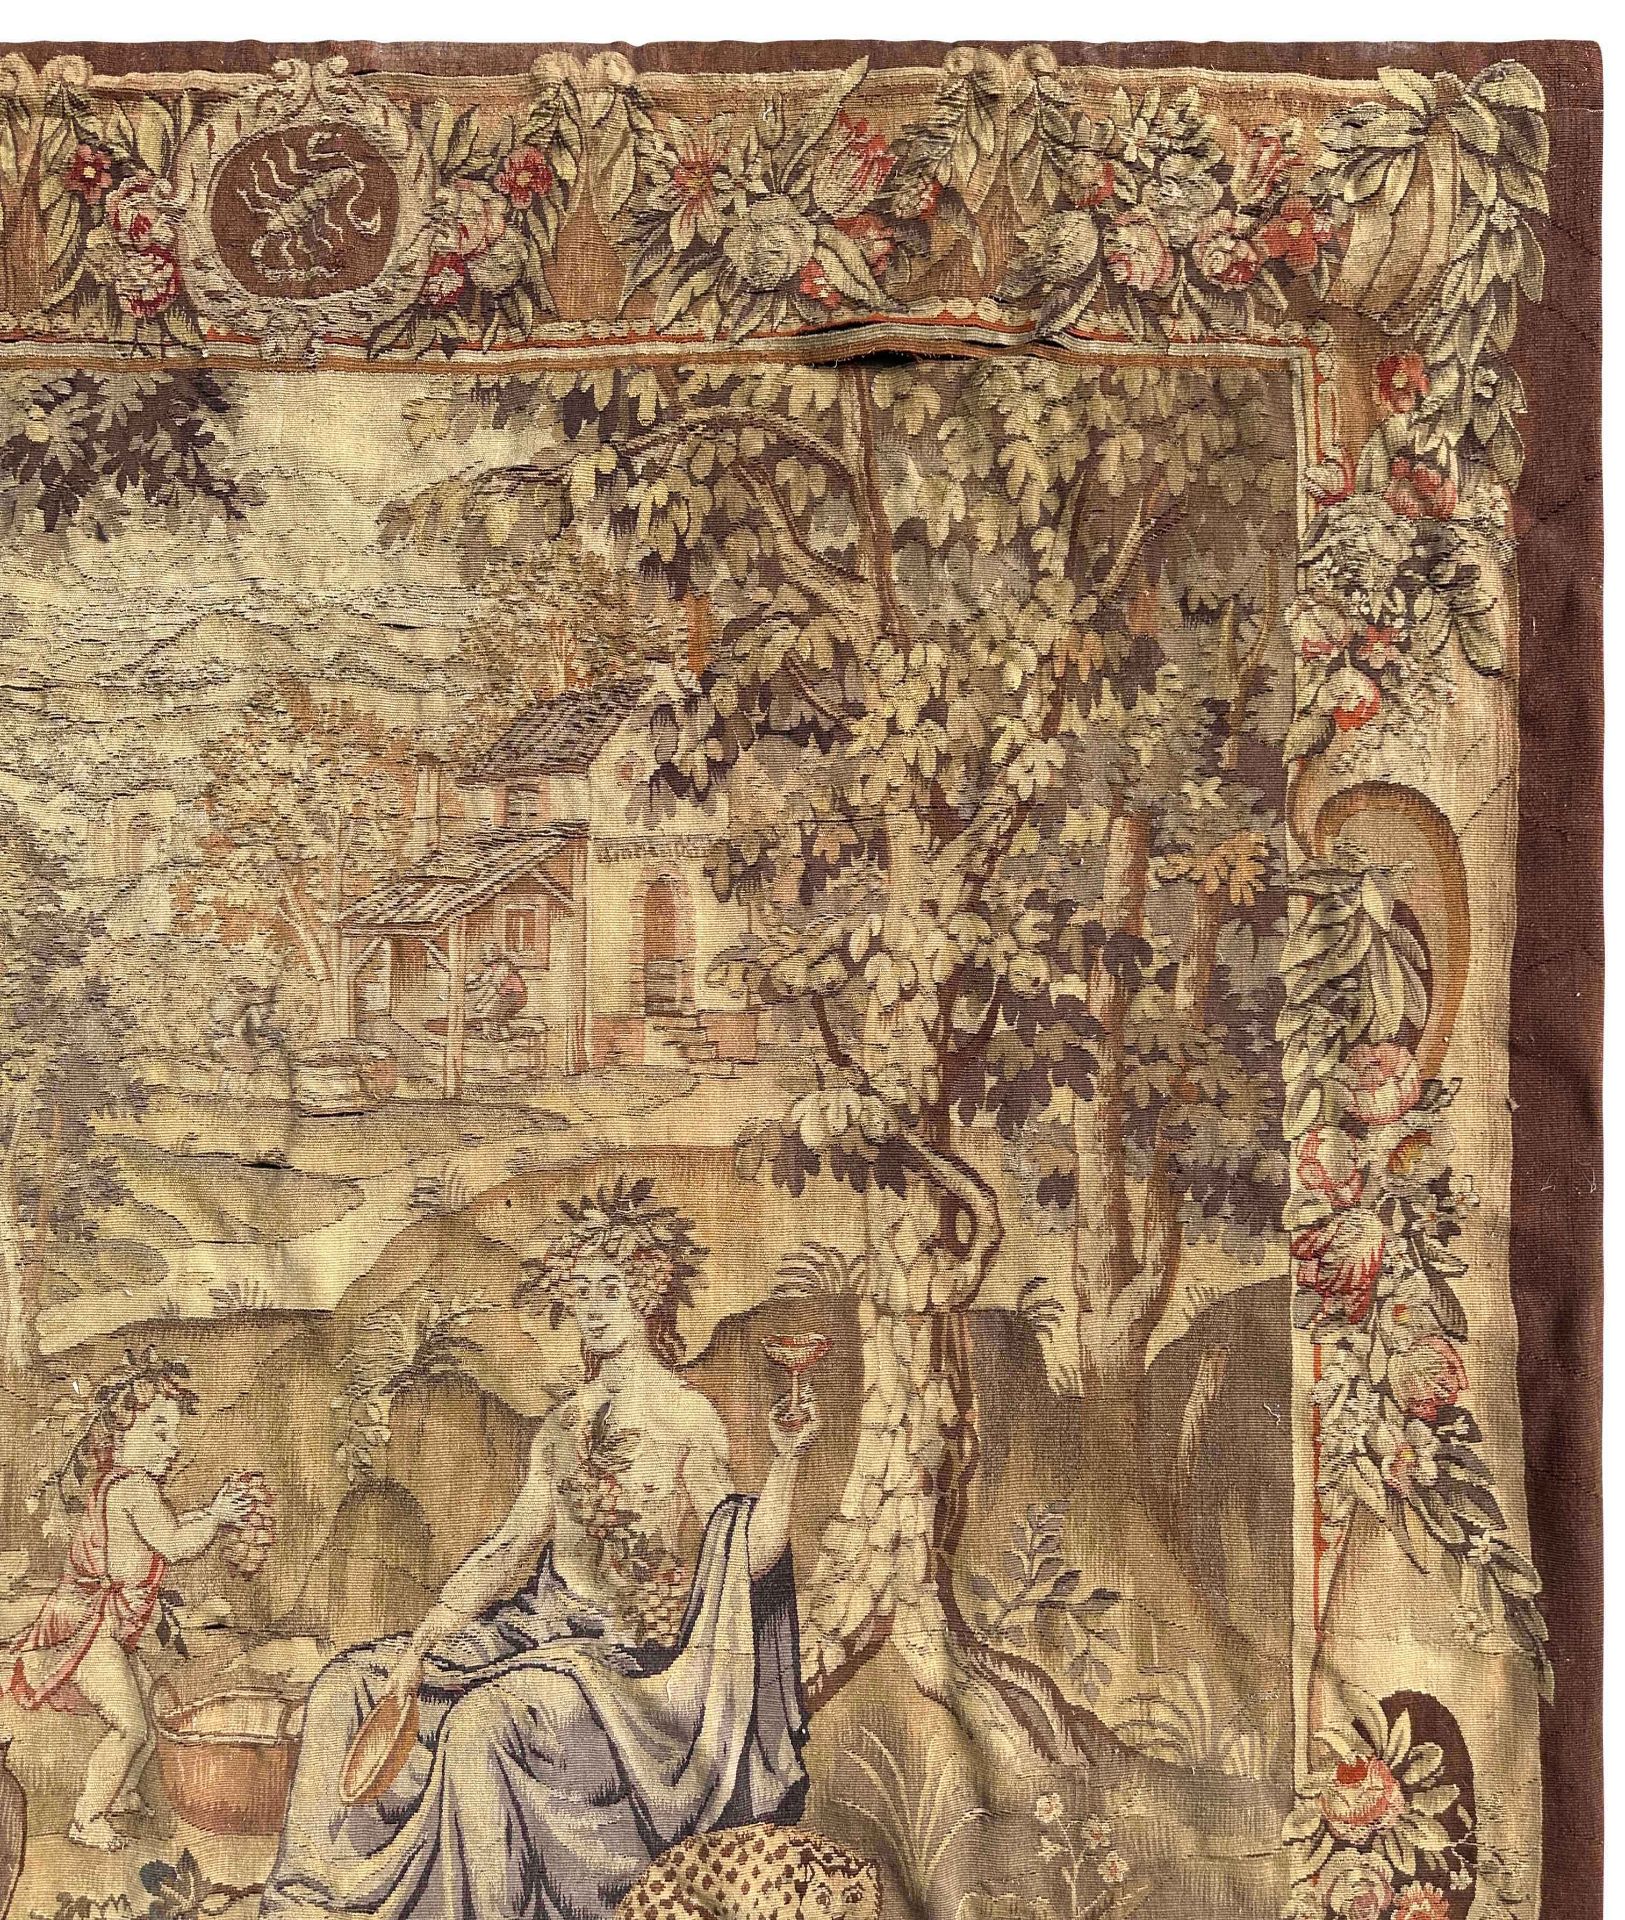 Tapestry. 19th century. Youthful Bacchus. - Image 5 of 12